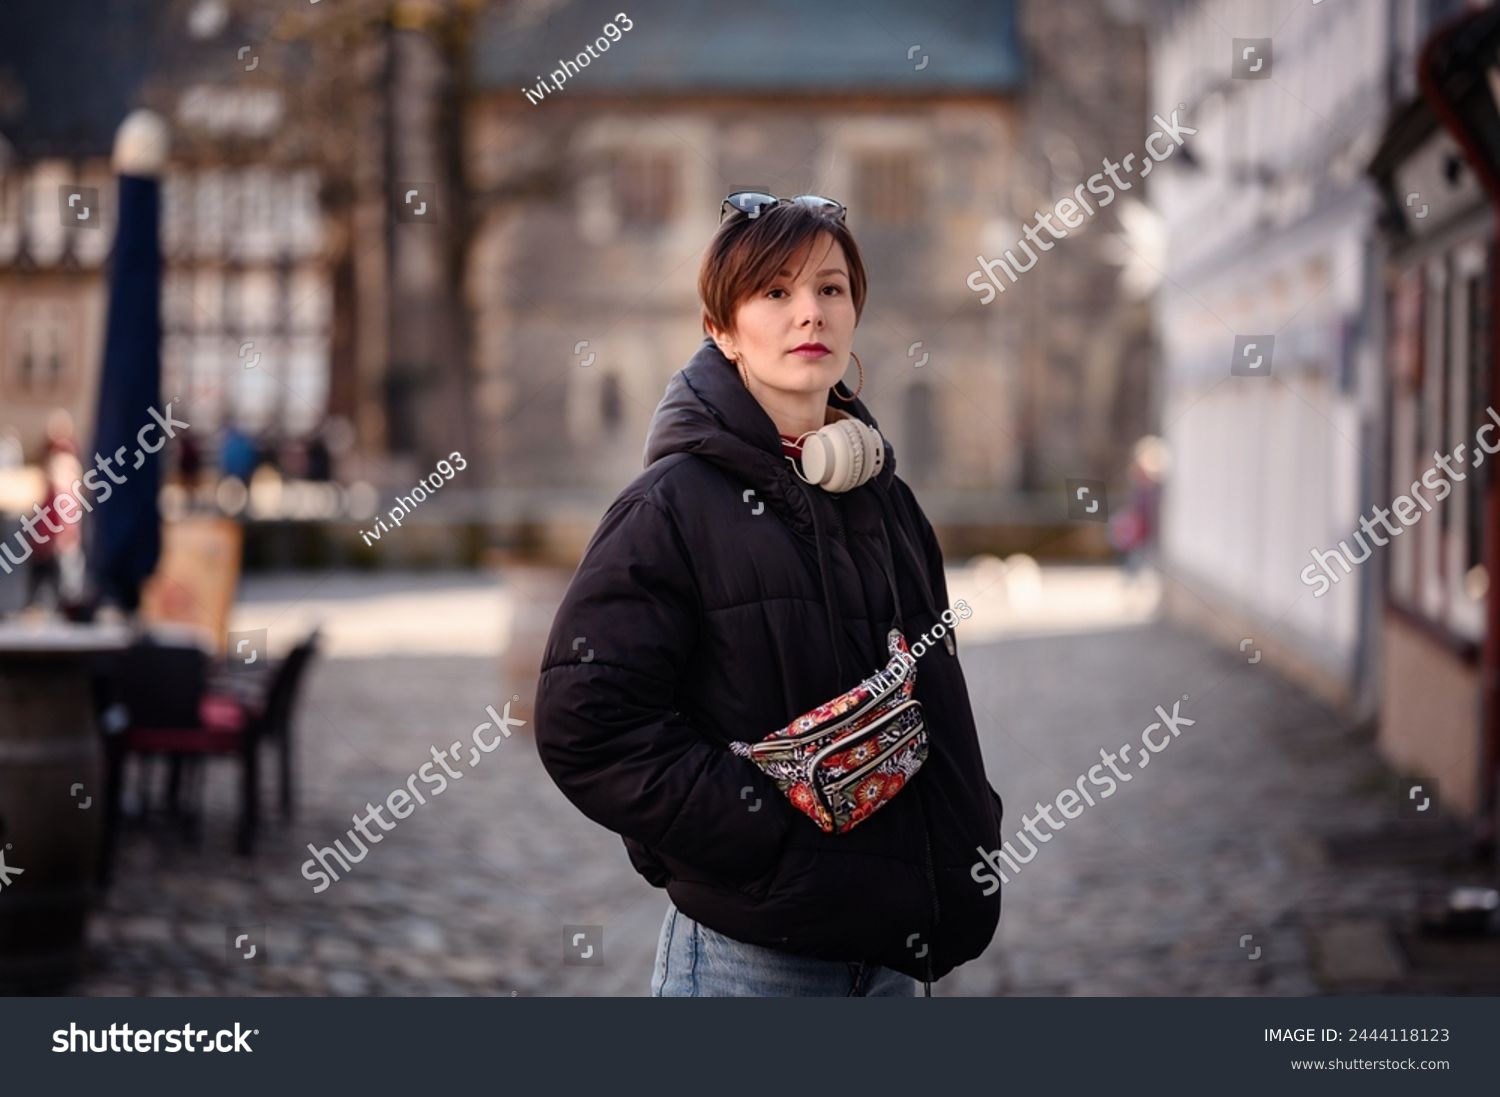 A poised adult woman with short hair and red lipstick stands confidently outdoors. She sports casual attire with a patterned fanny pack and headphones around her neck,  #2444118123